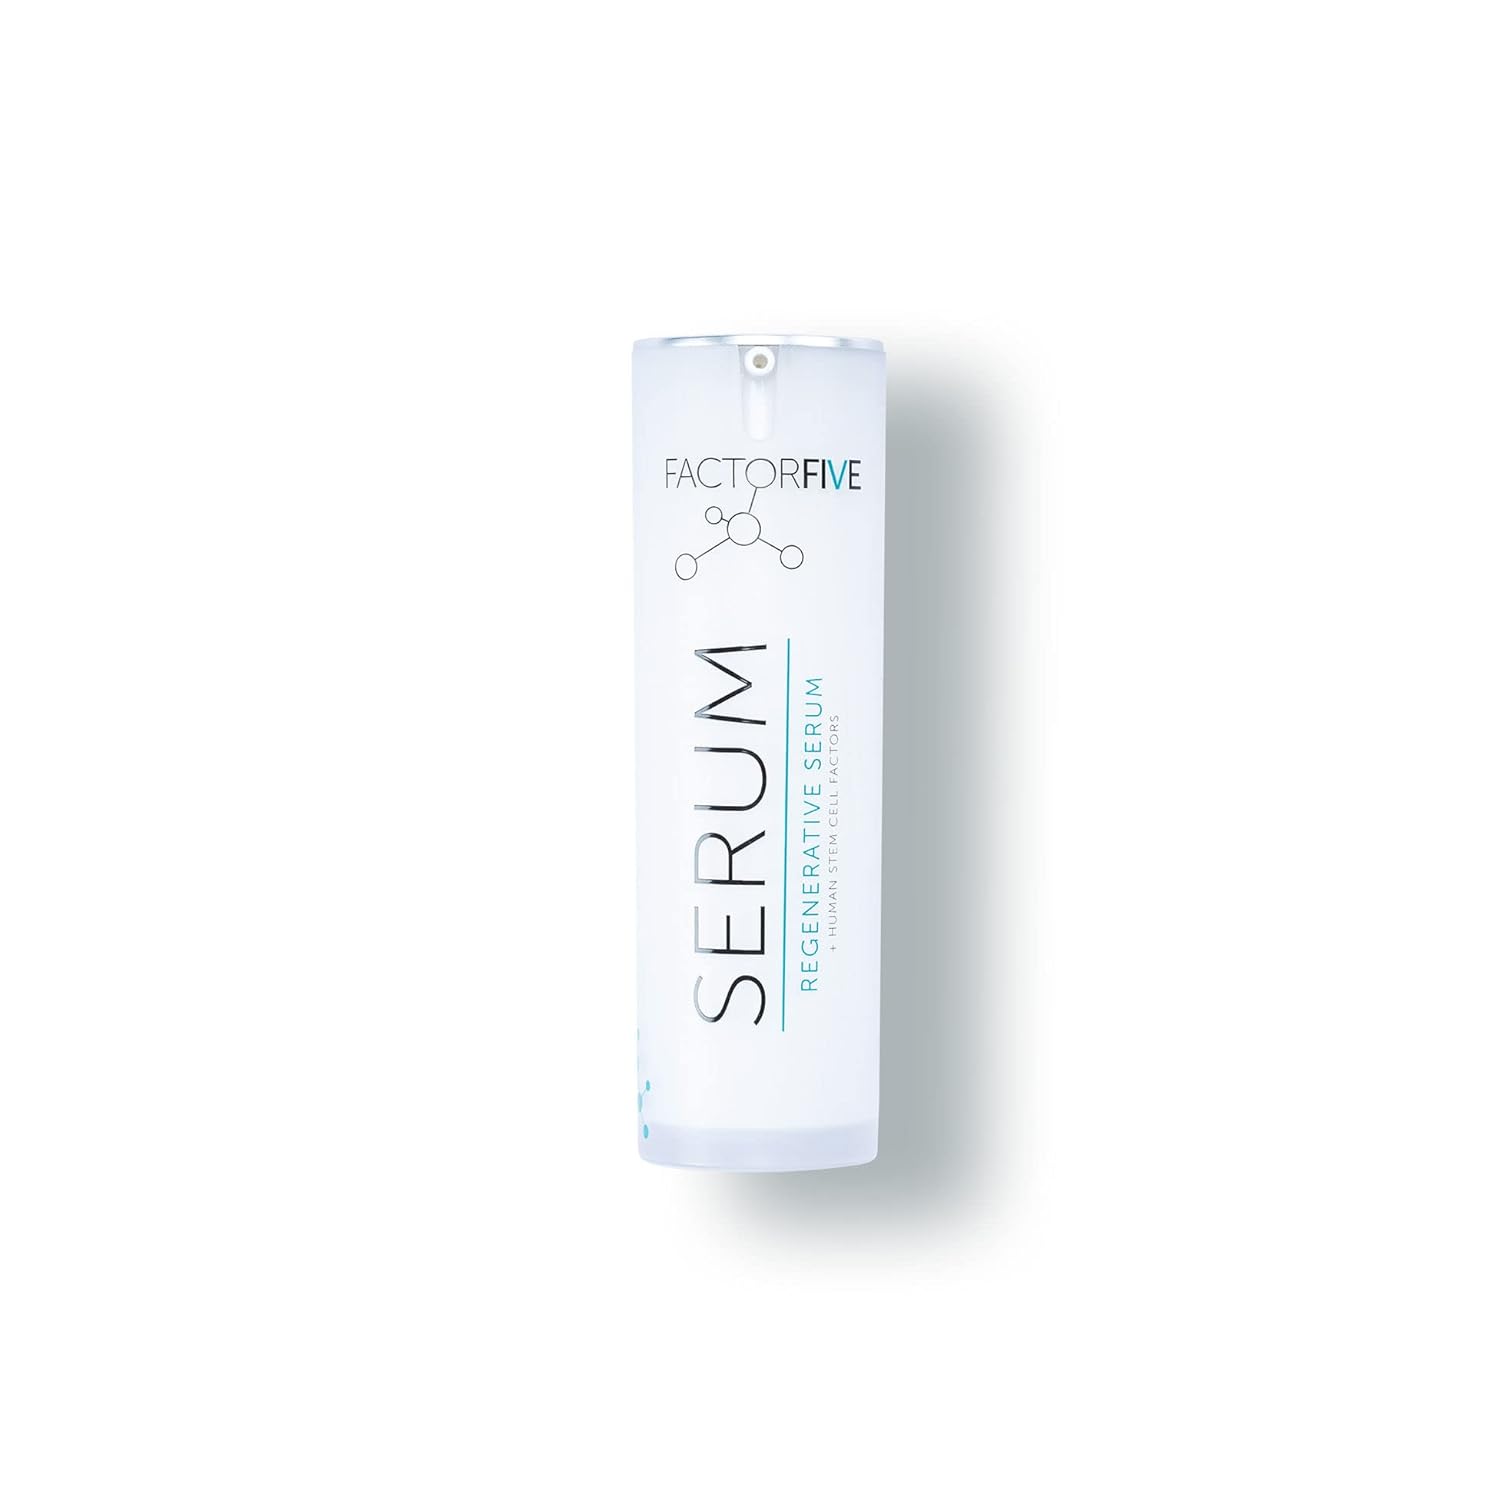 FACTORFIVE Regenerative Serum with Stem Cell Growth Factors, HGF for Skin Tightening and Smoothing, Wrinkle and Pore Reduction, and Rejuvenation - 1  /30ml